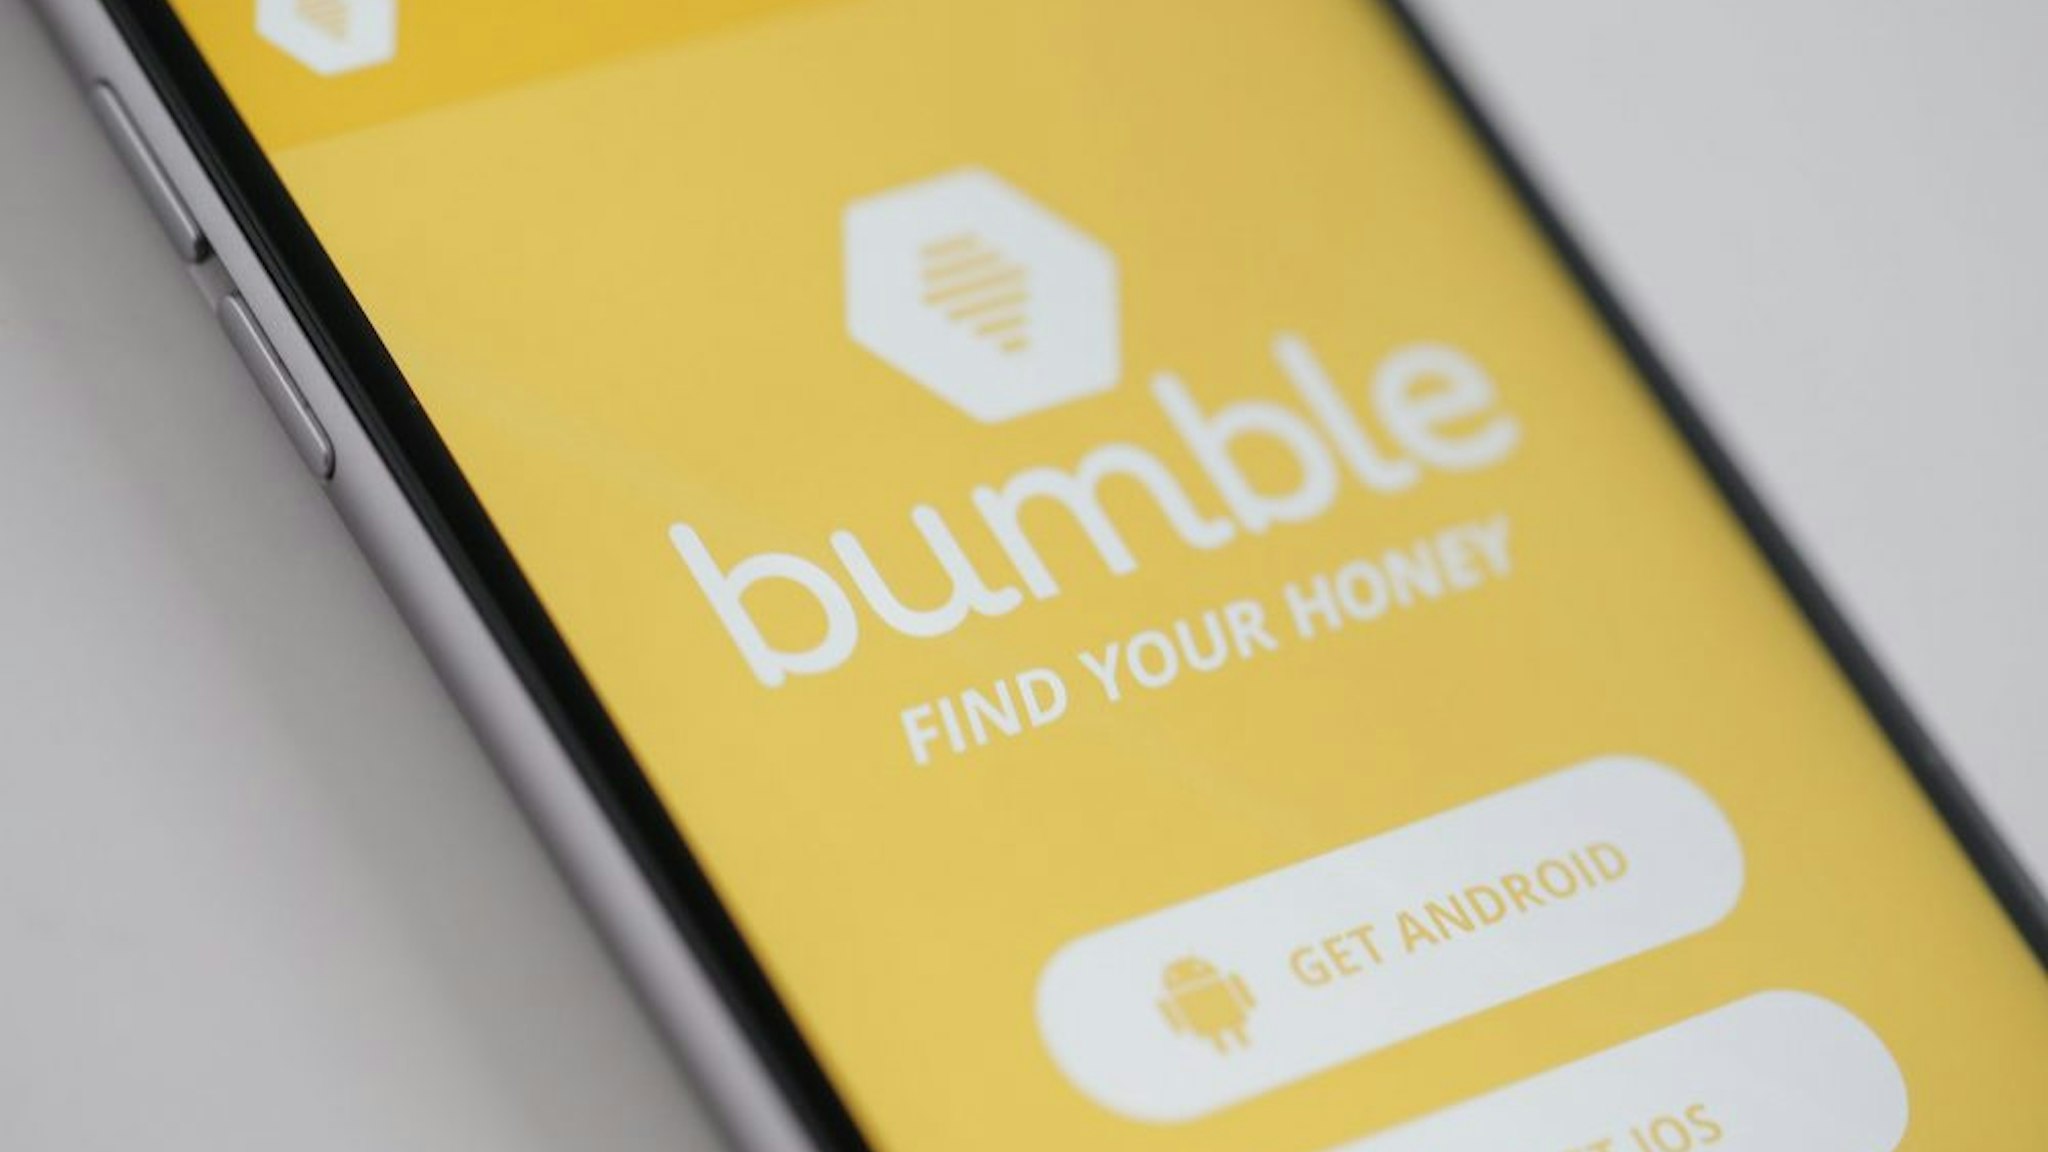 The Bumble app is seen on an iPhone on 16 March, 2017. The app is resembles Tindr in that it let's heterosexuals find each other however Bumble only lets female users start a conversation after interested parties have made a match.